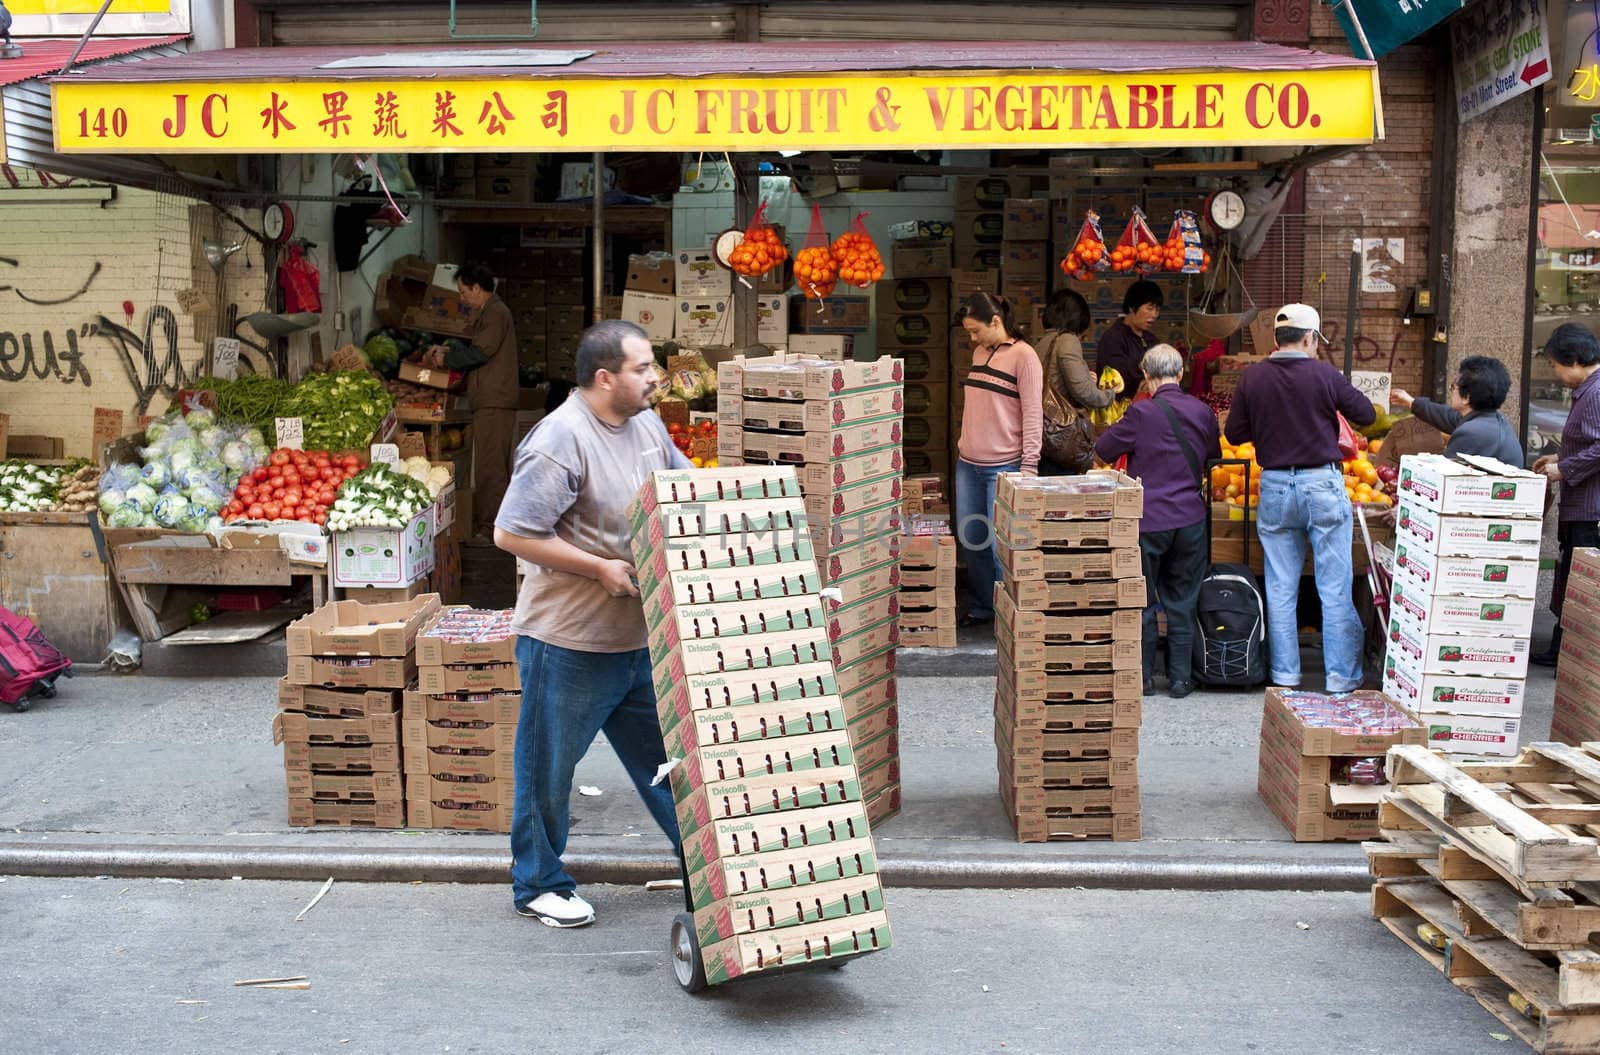 Man with hand truck of produce boxes in front of Chinese produce shop, chinatown, NYC